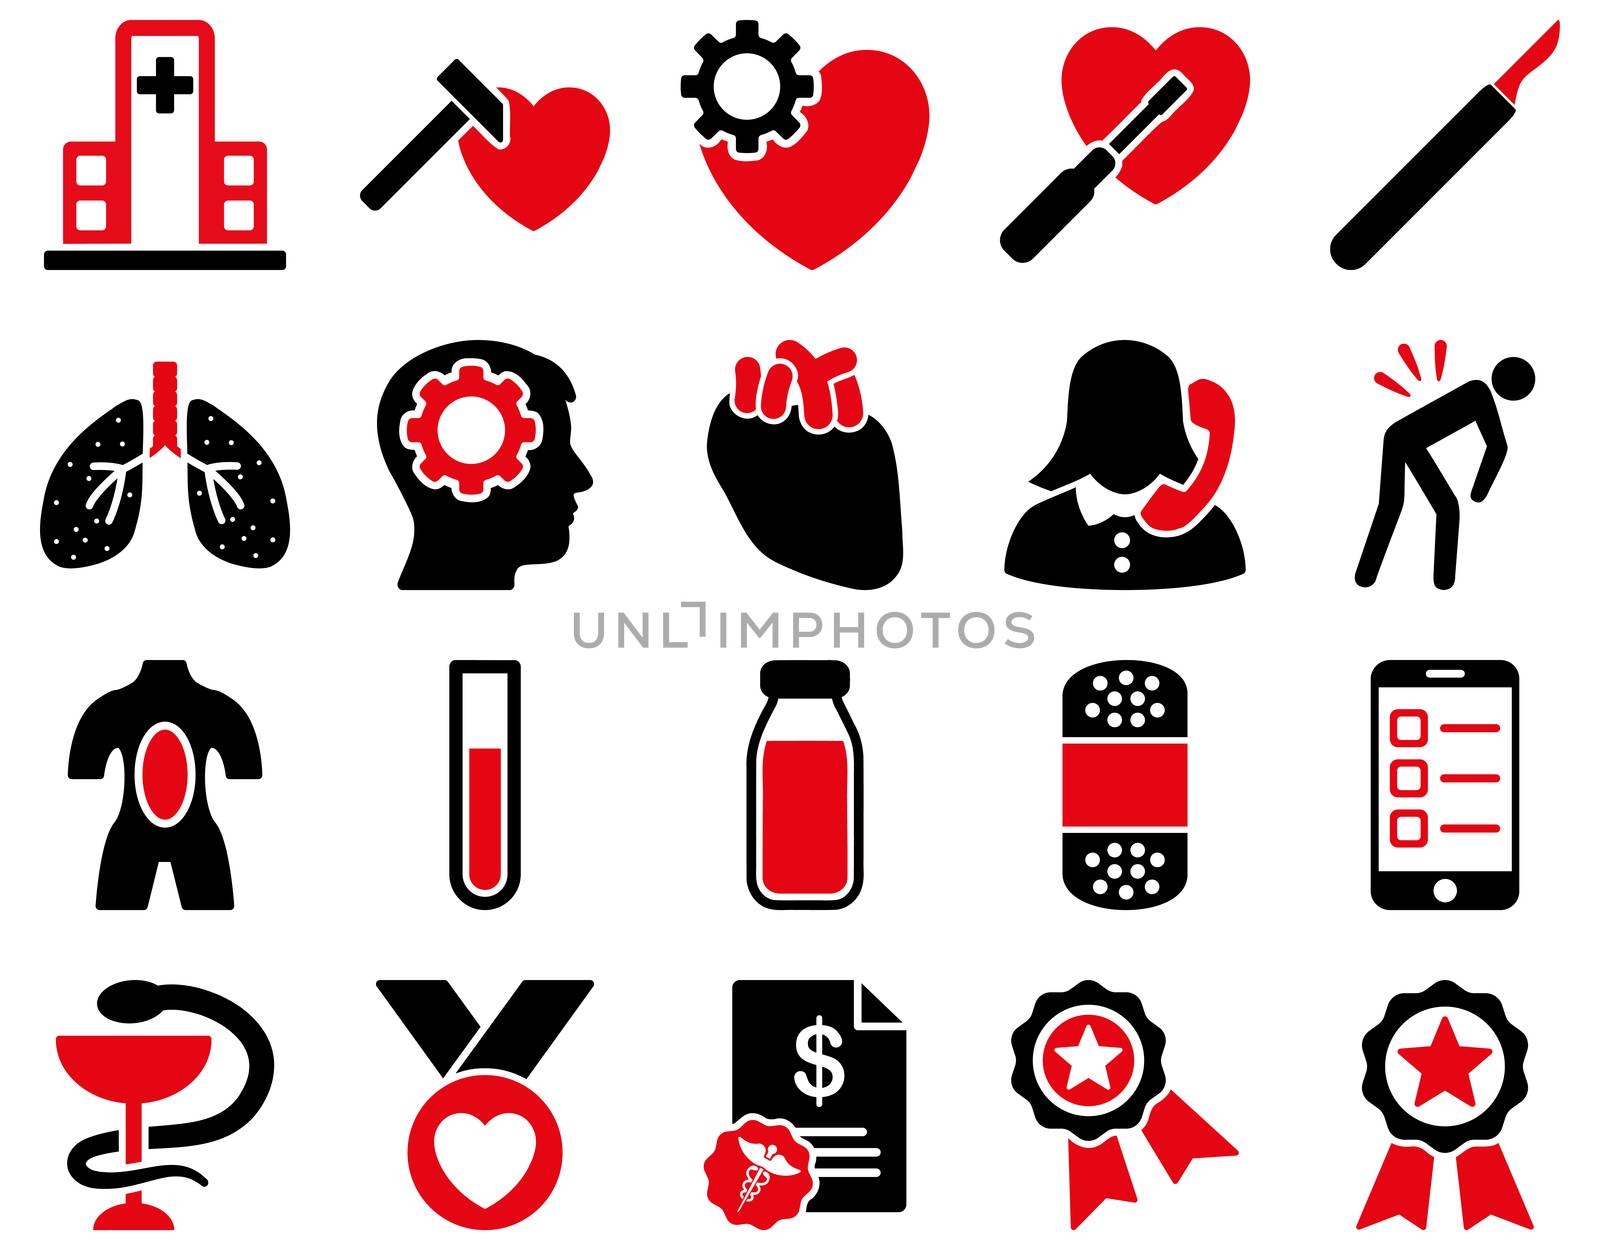 Medical icon set. Style: bicolor icons drawn with intensive red and black colors on a white background.